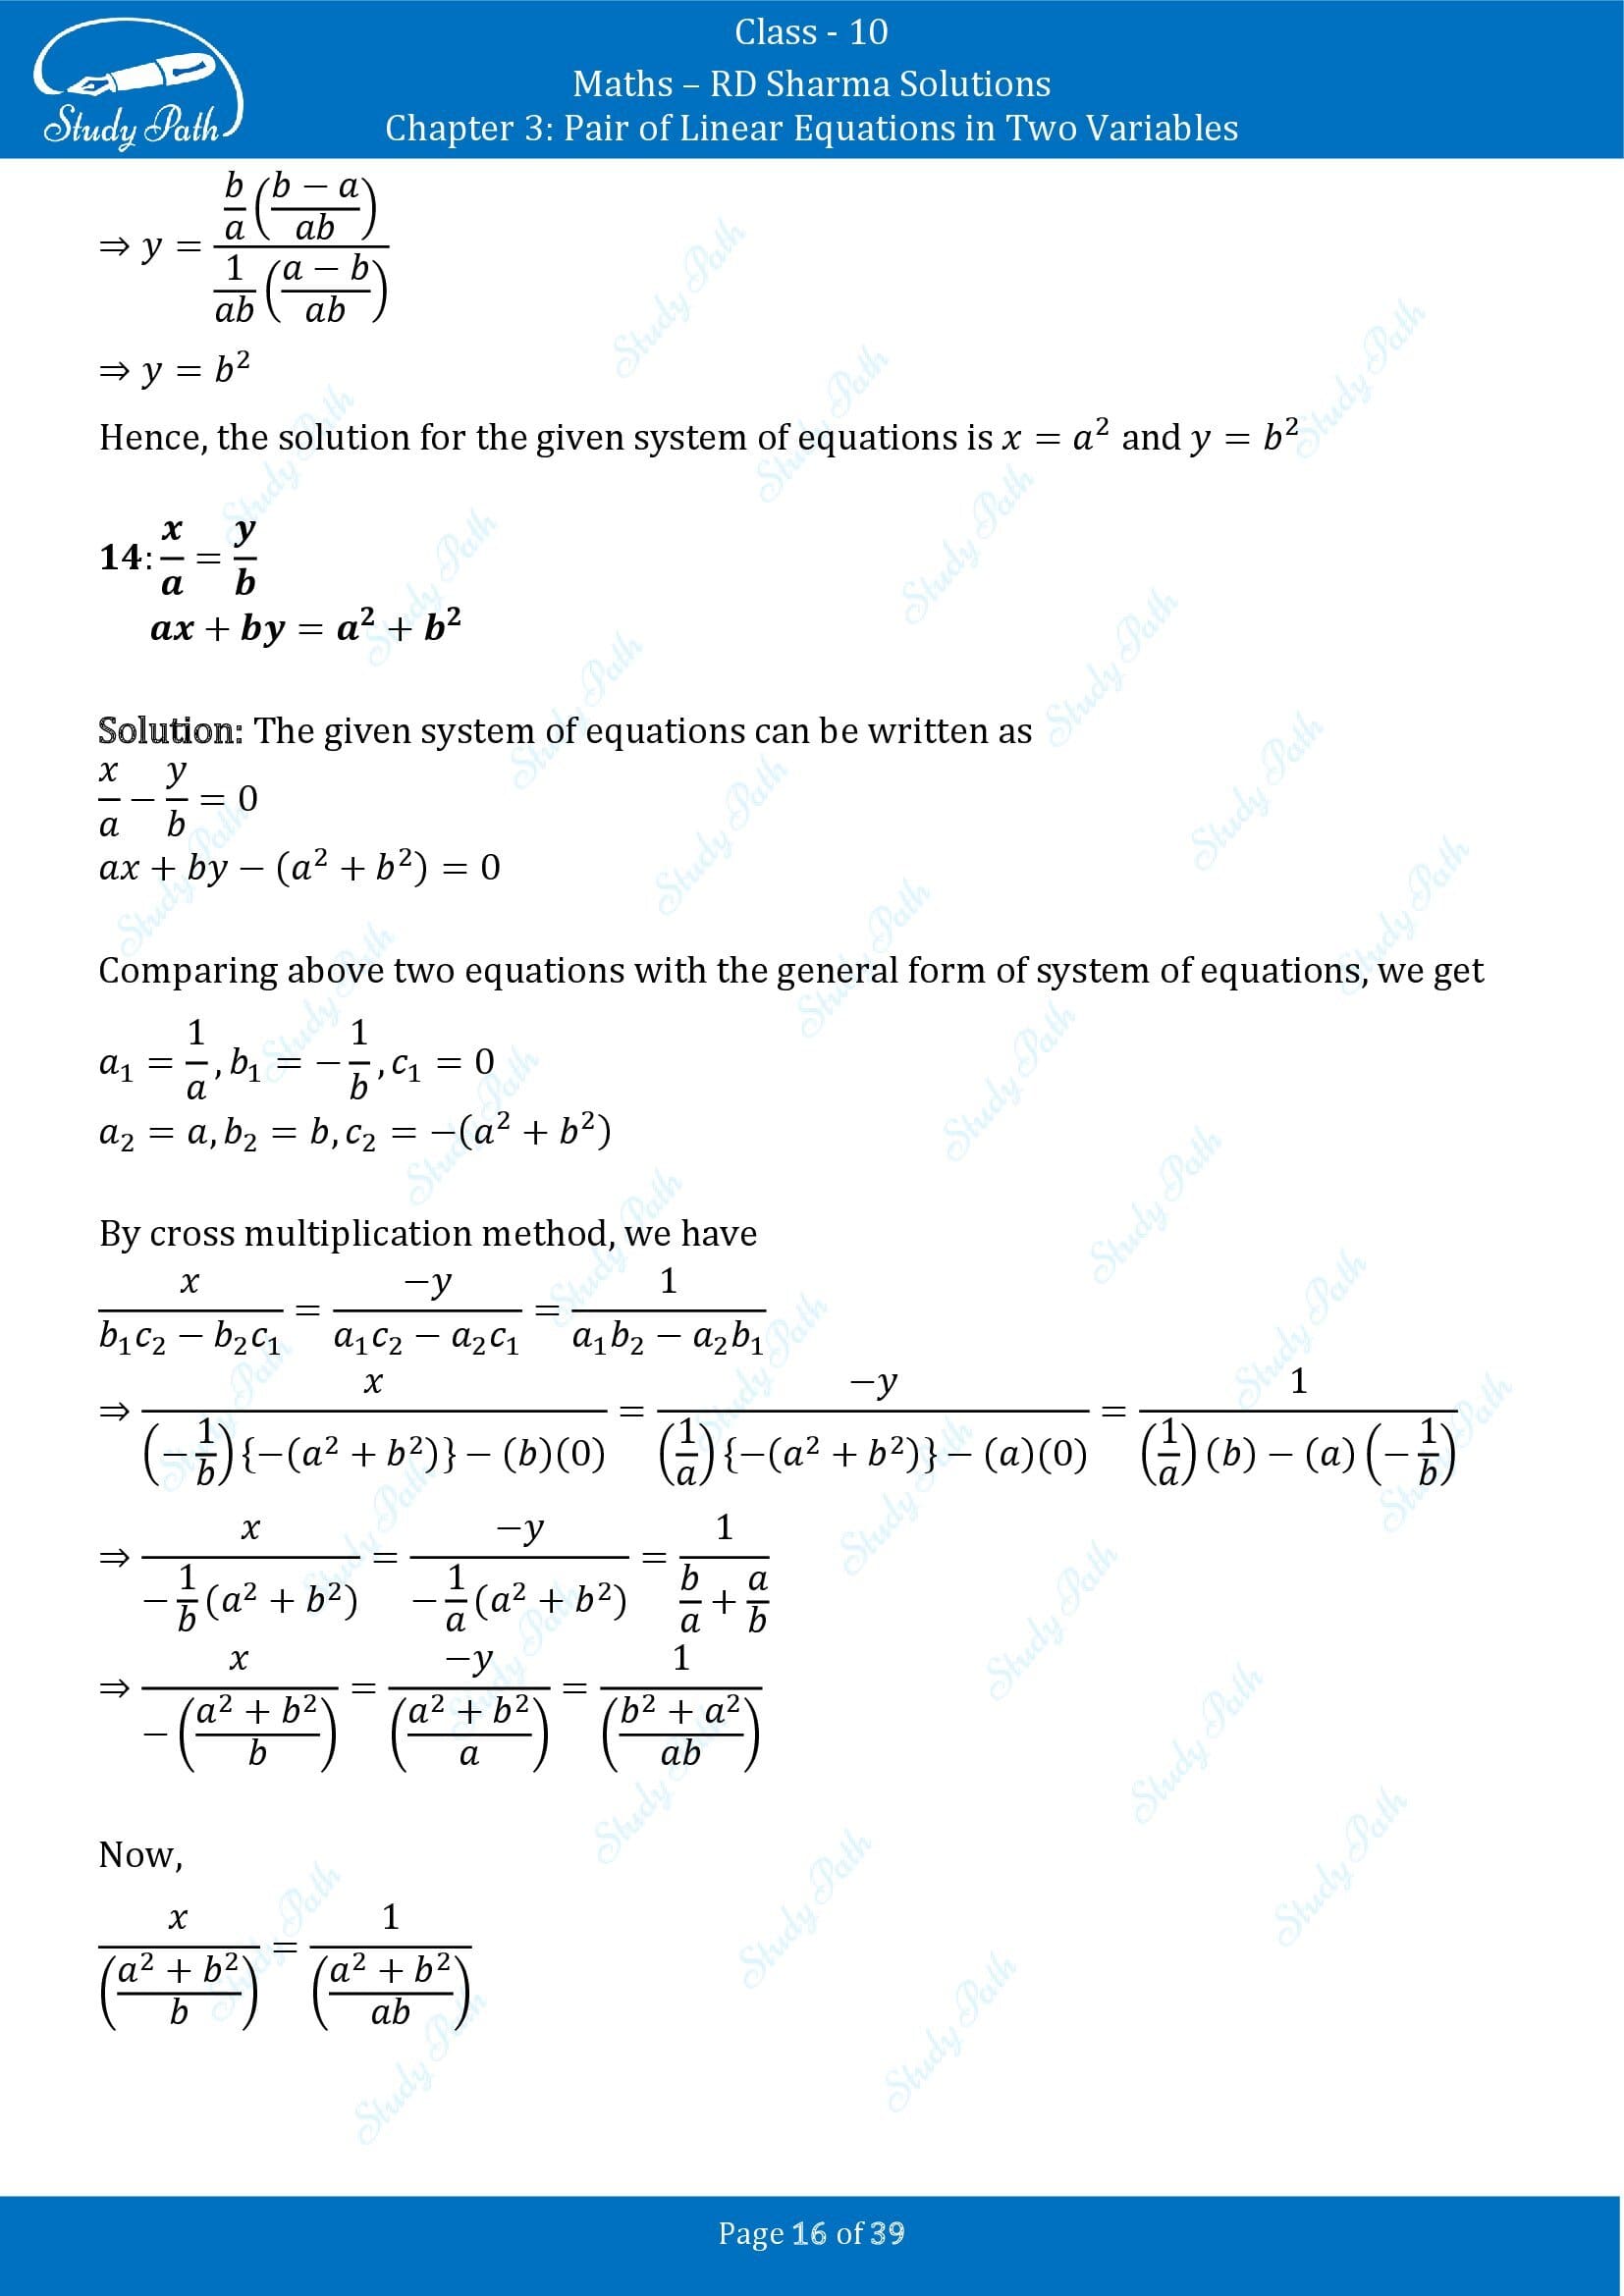 RD Sharma Solutions Class 10 Chapter 3 Pair of Linear Equations in Two Variables Exercise 3.4 00016